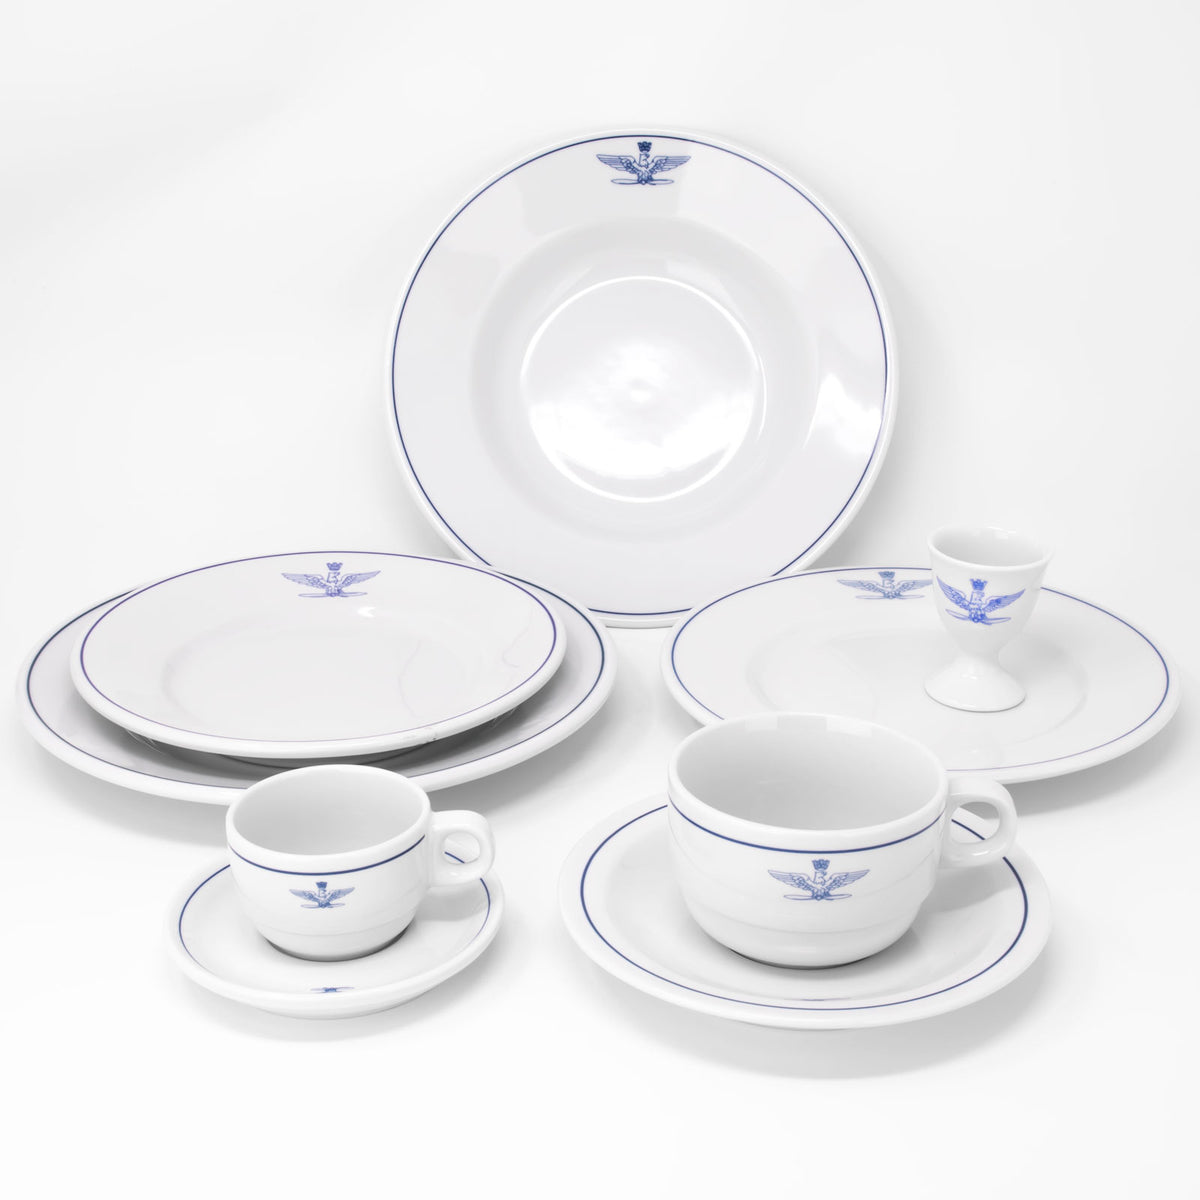 Italian Officer's Club Porcelain Collection (14-pieces)